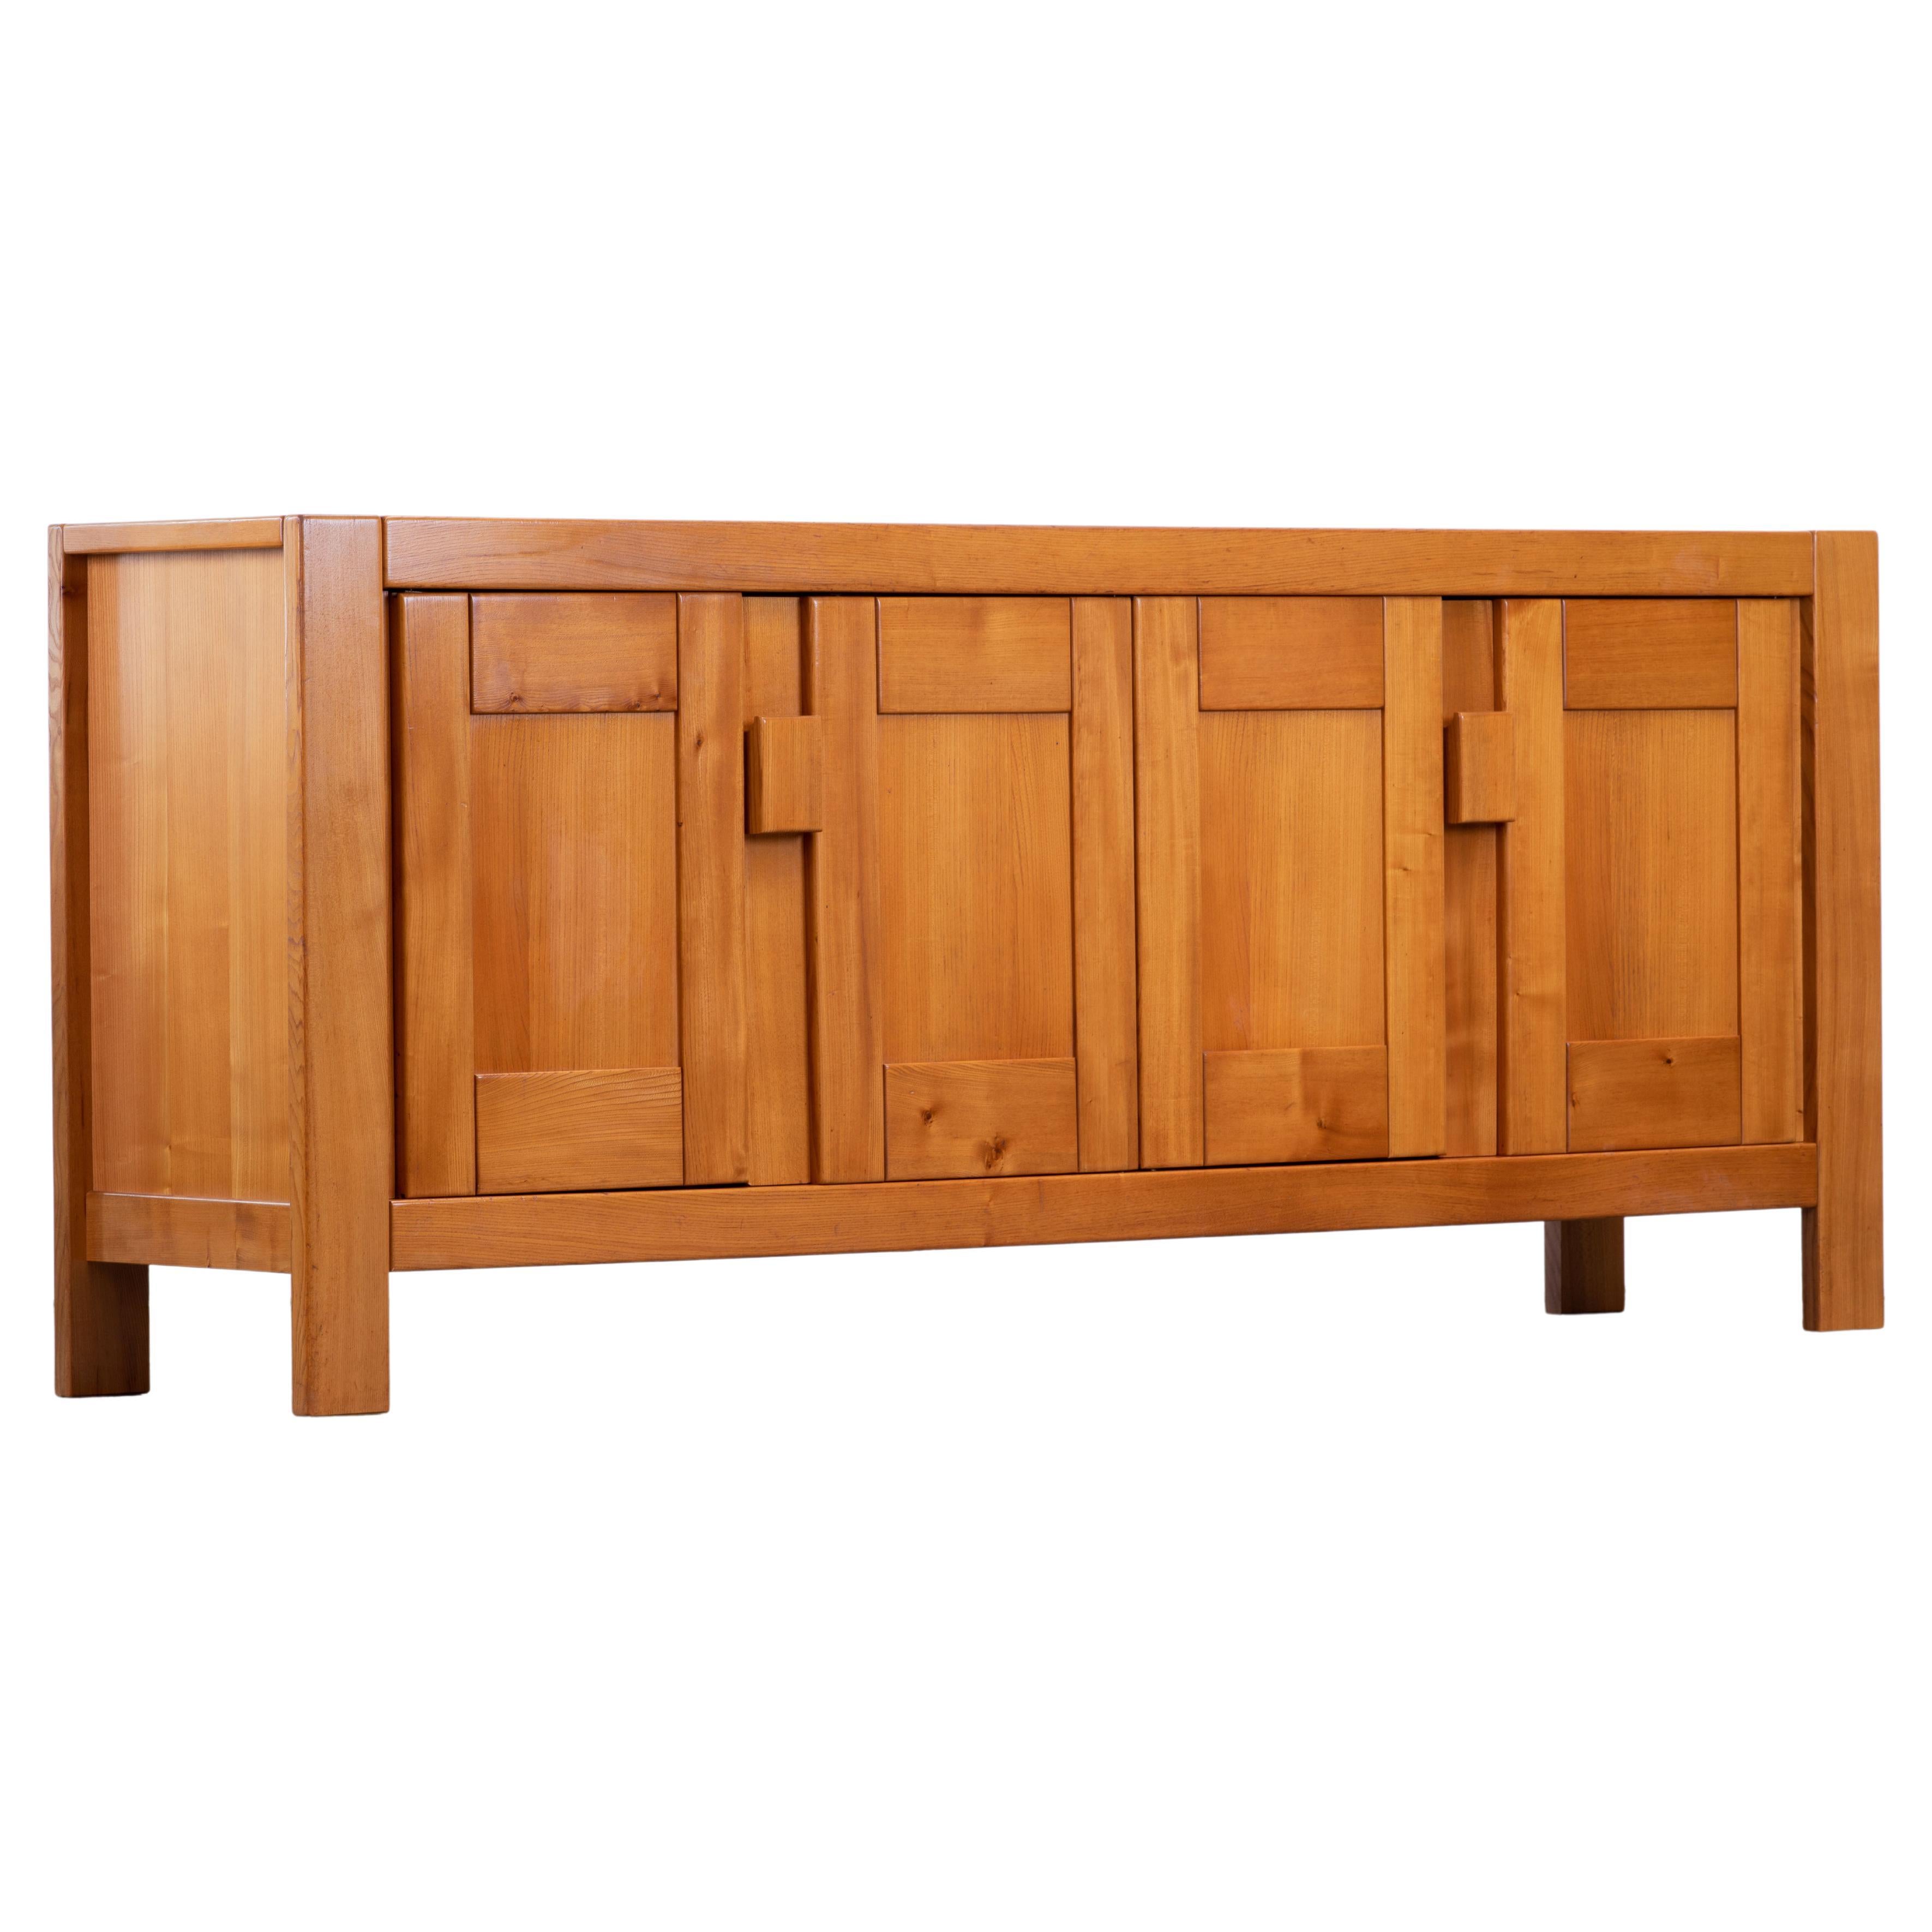 Maison Regain Attributed Sideboard in Solid Elm, France, 1970s